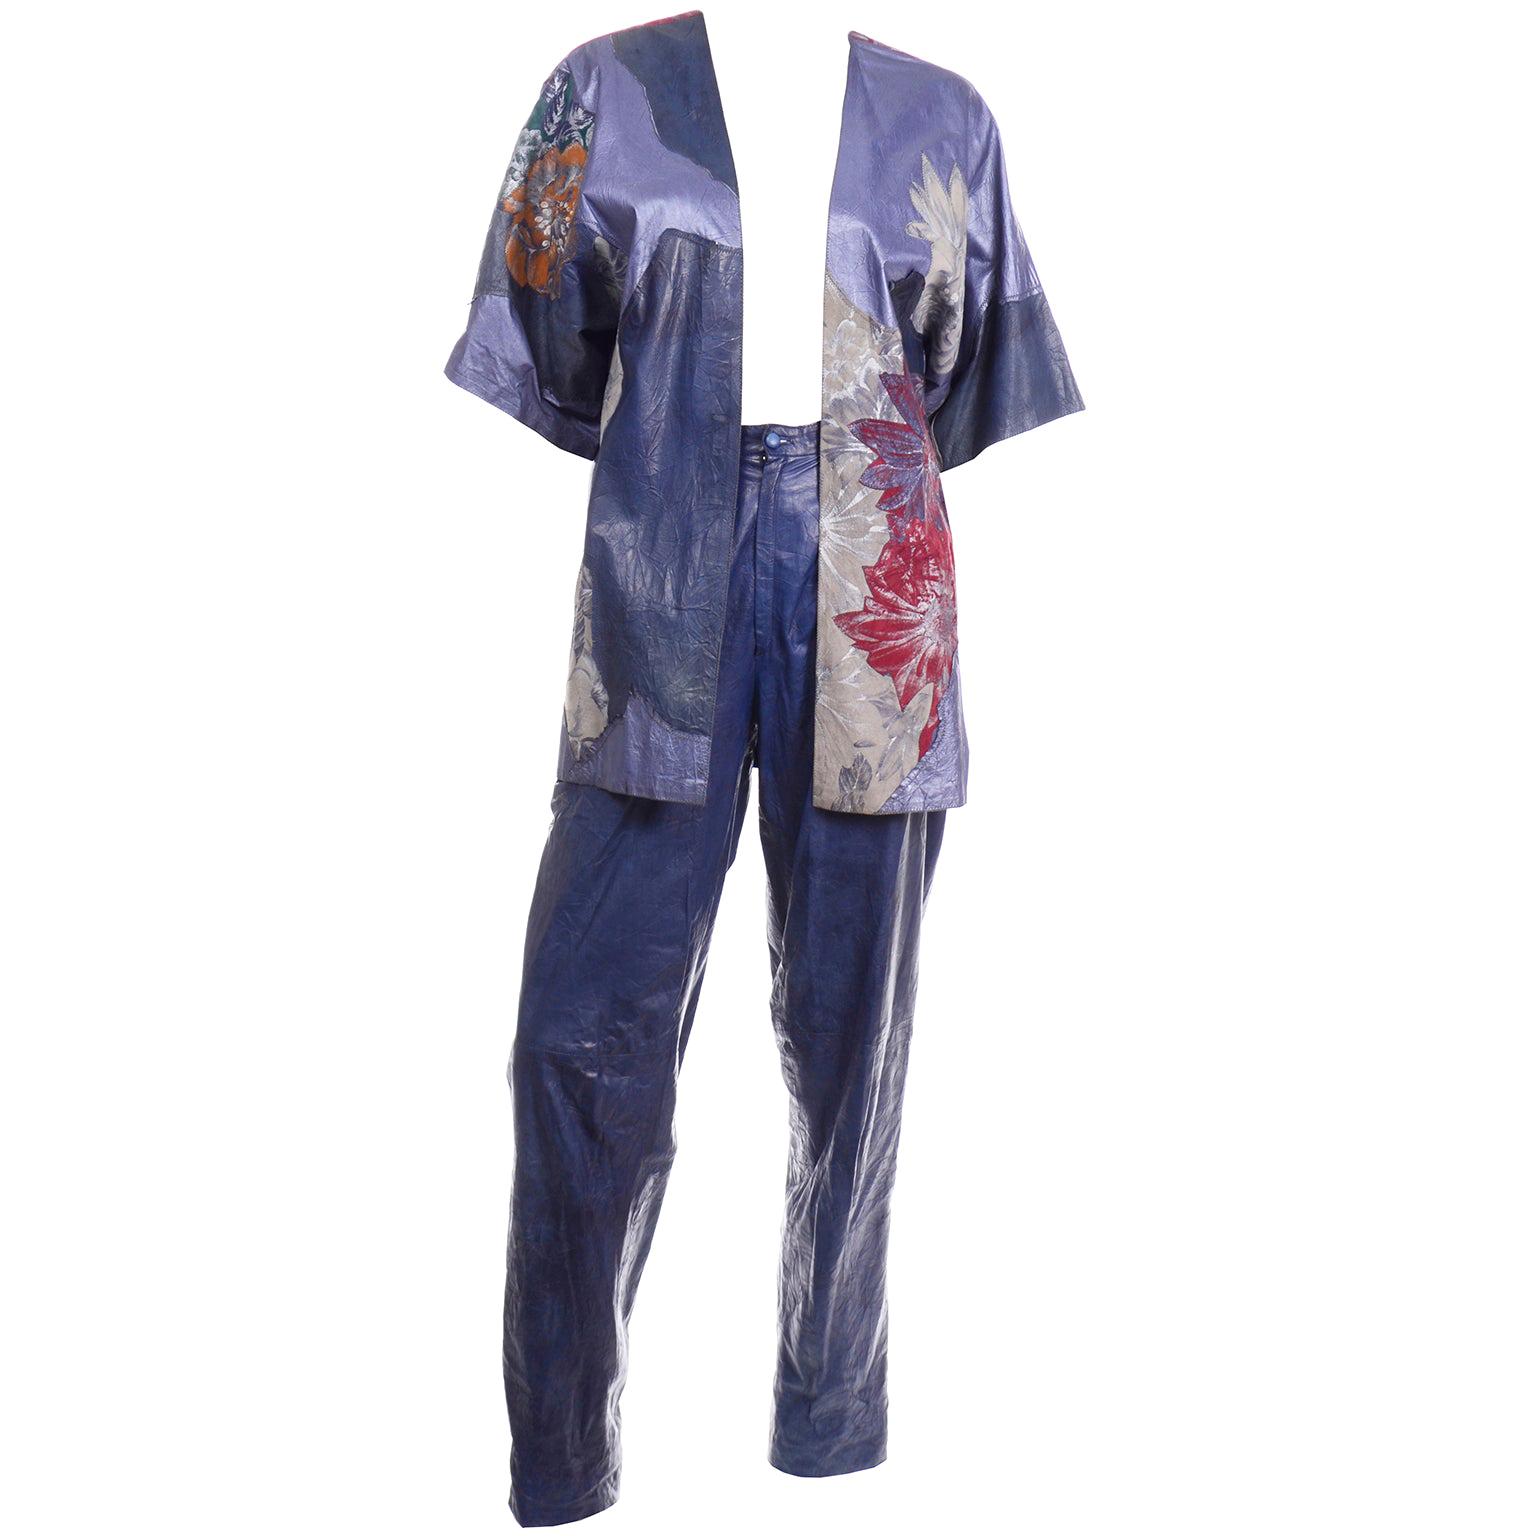 Roberto Cavalli Patchwork Blue Leather Pants & Hand Painted Jacket Suit Outfit For Sale